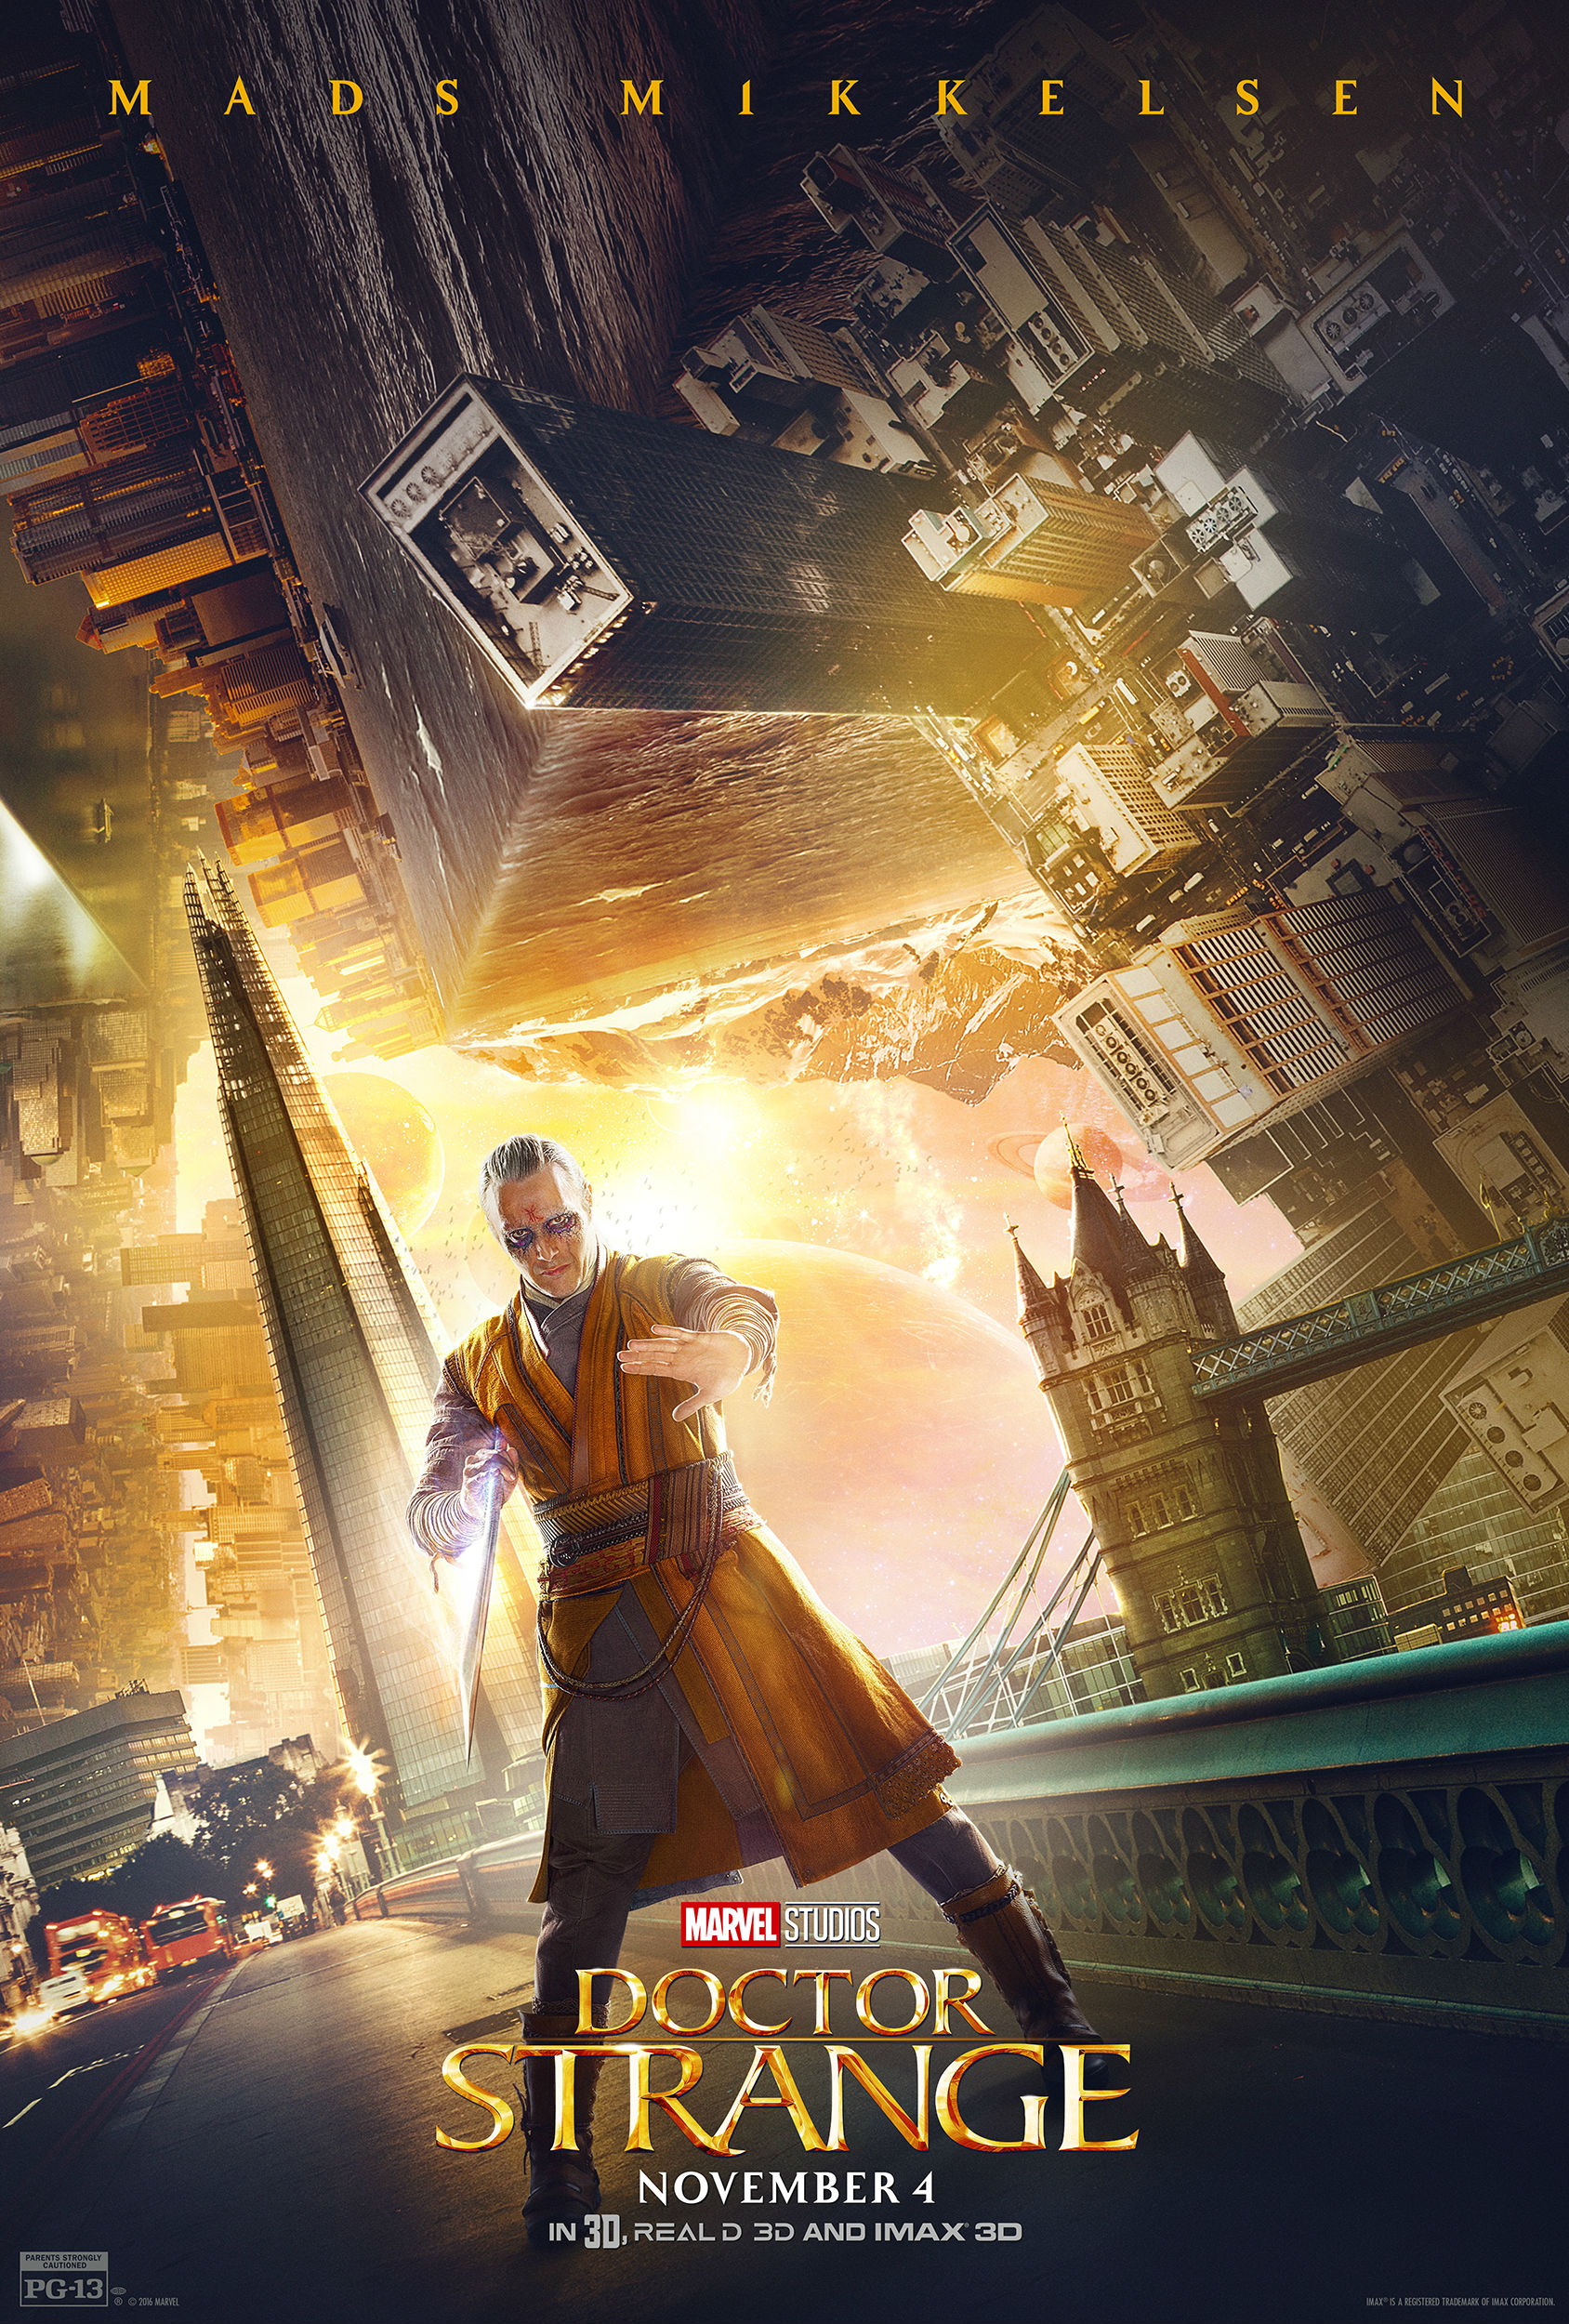 These Six New Doctor Strange Posters Will Have You Head Over Heels (Or Vice Versa)